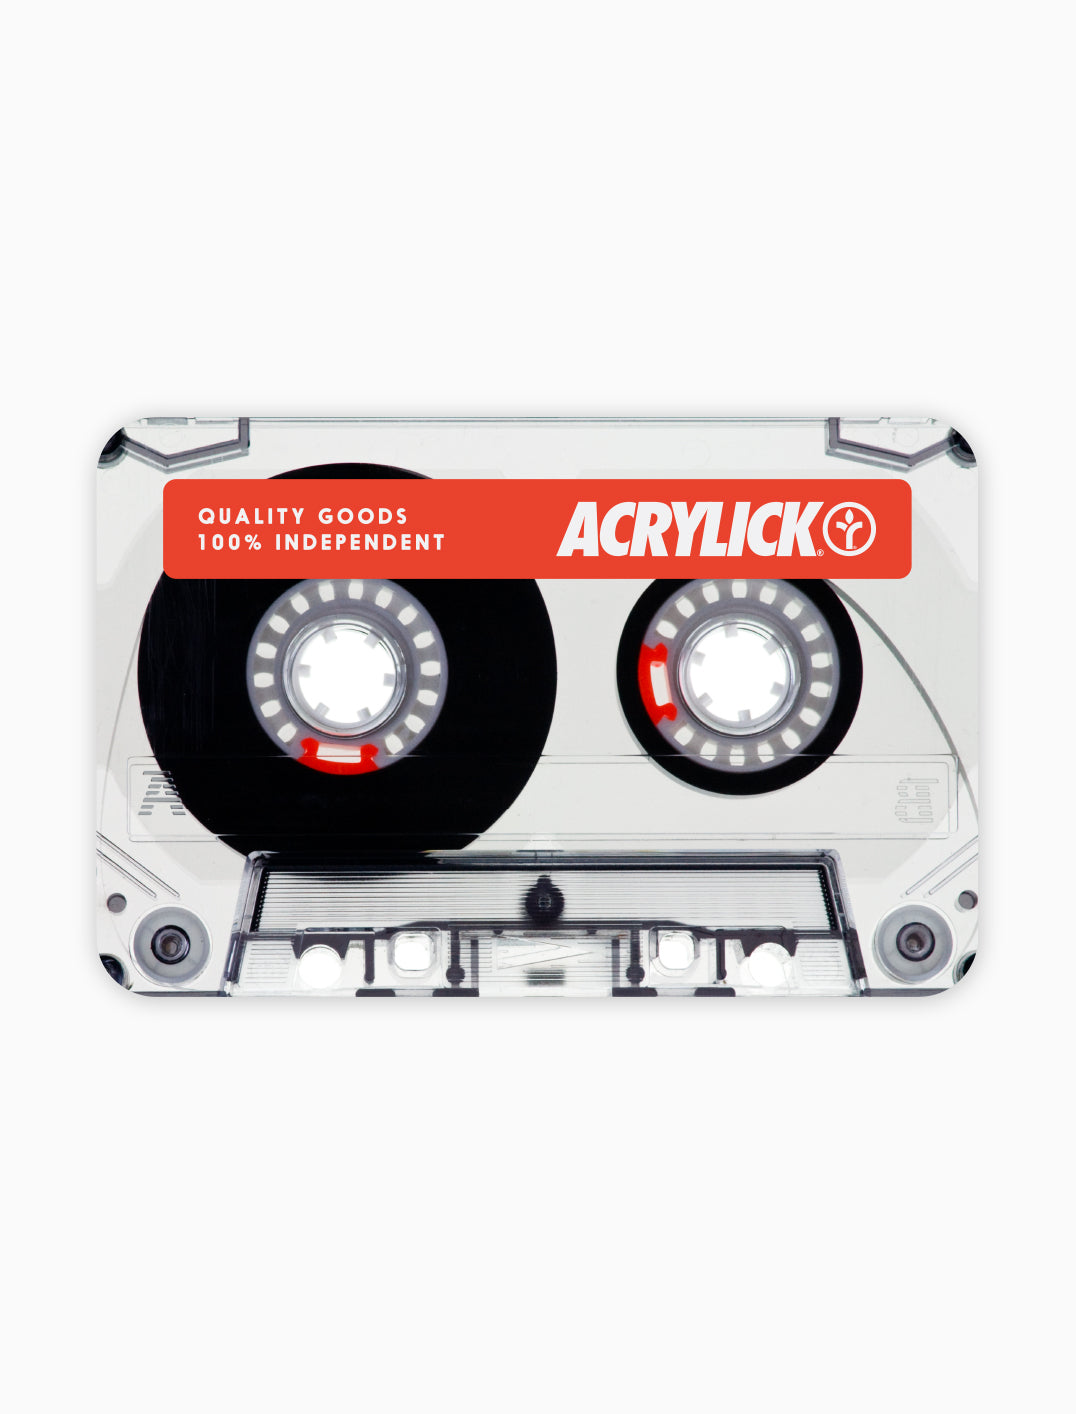 Acrylick Company - Gift Card - 2020 - Cassette Tape